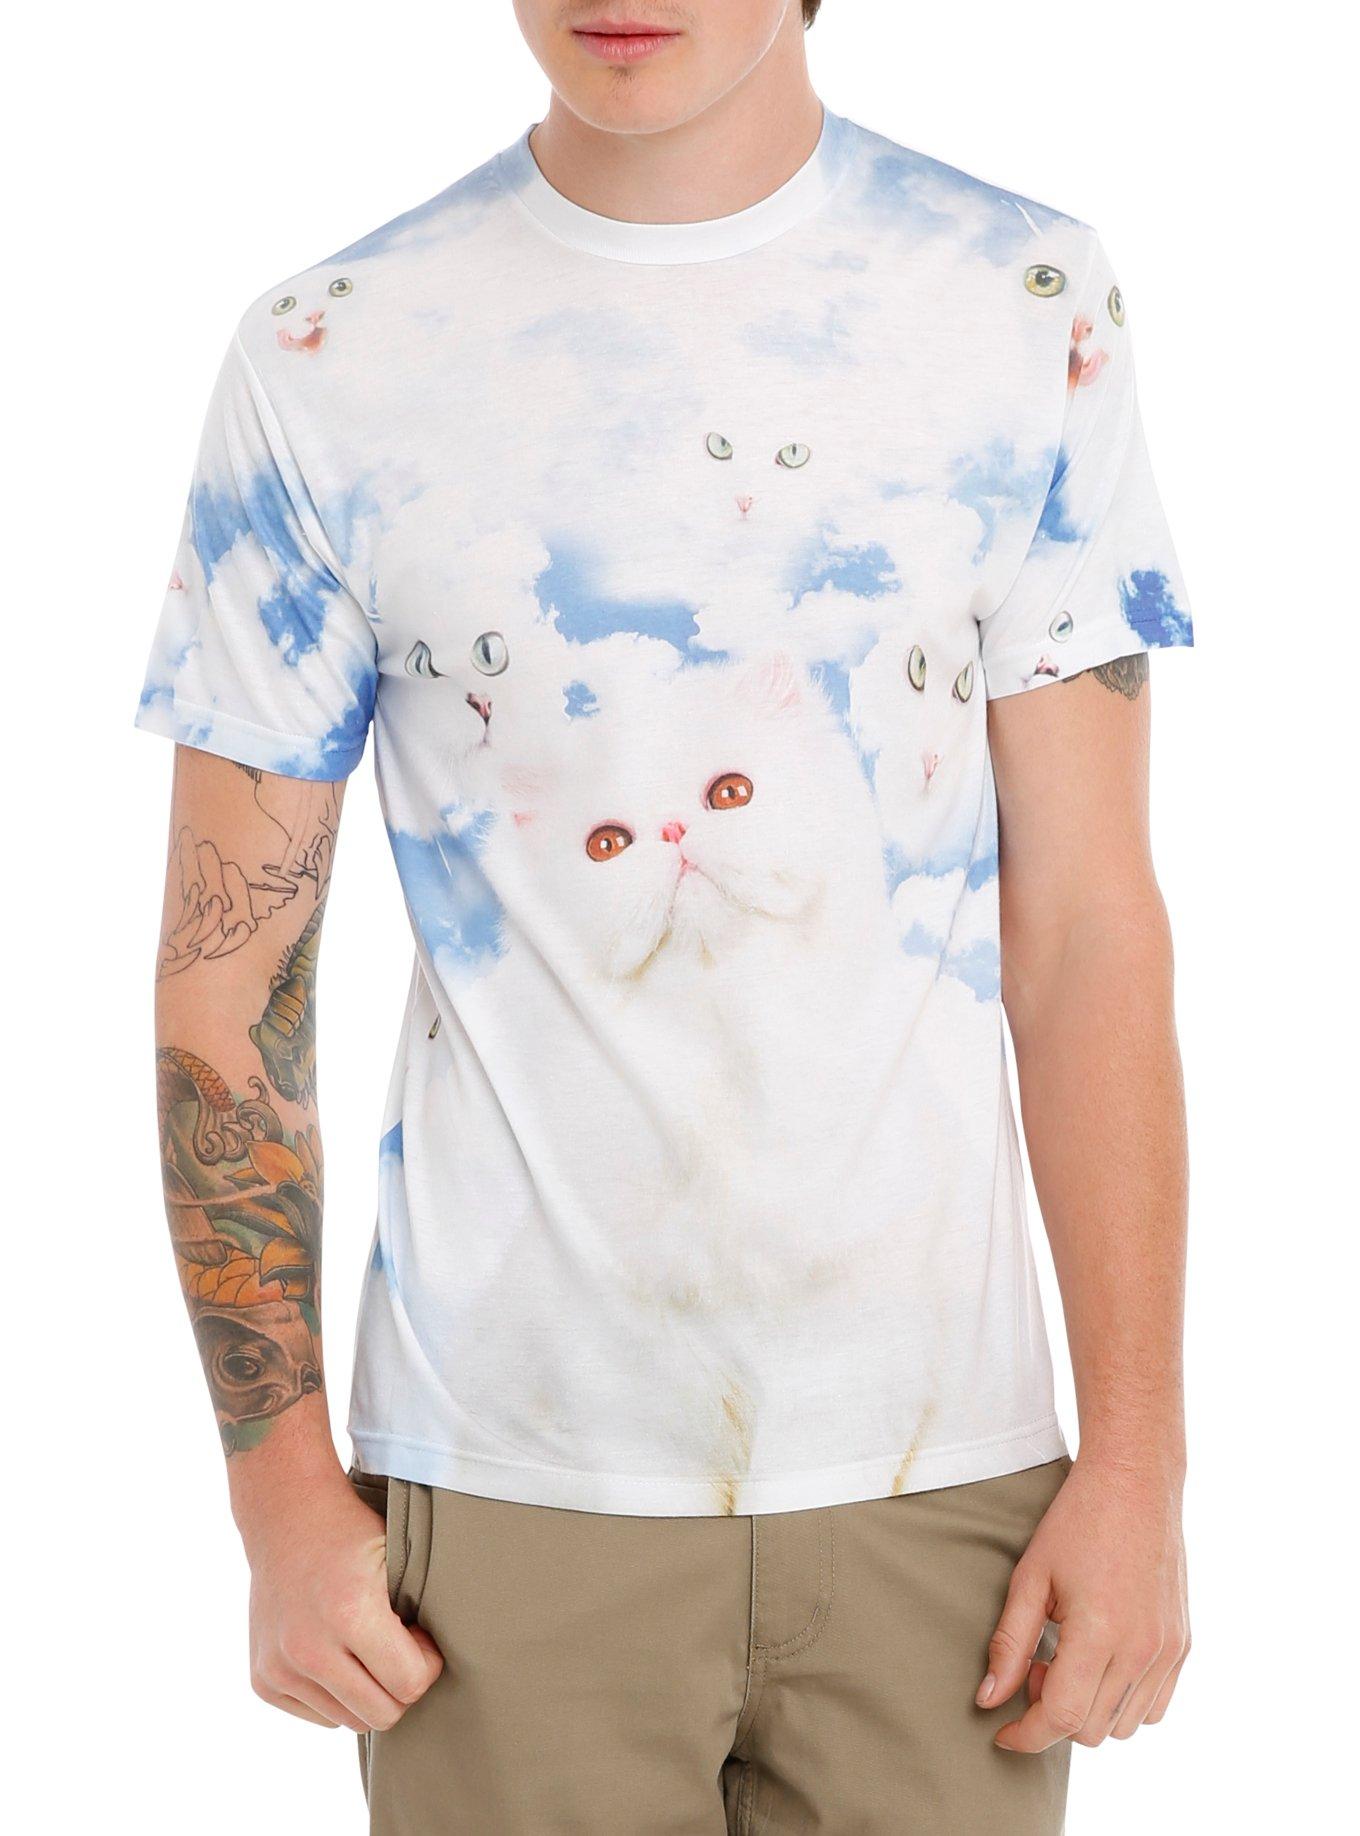 Cat In Clouds T-Shirt, WHITE, hi-res